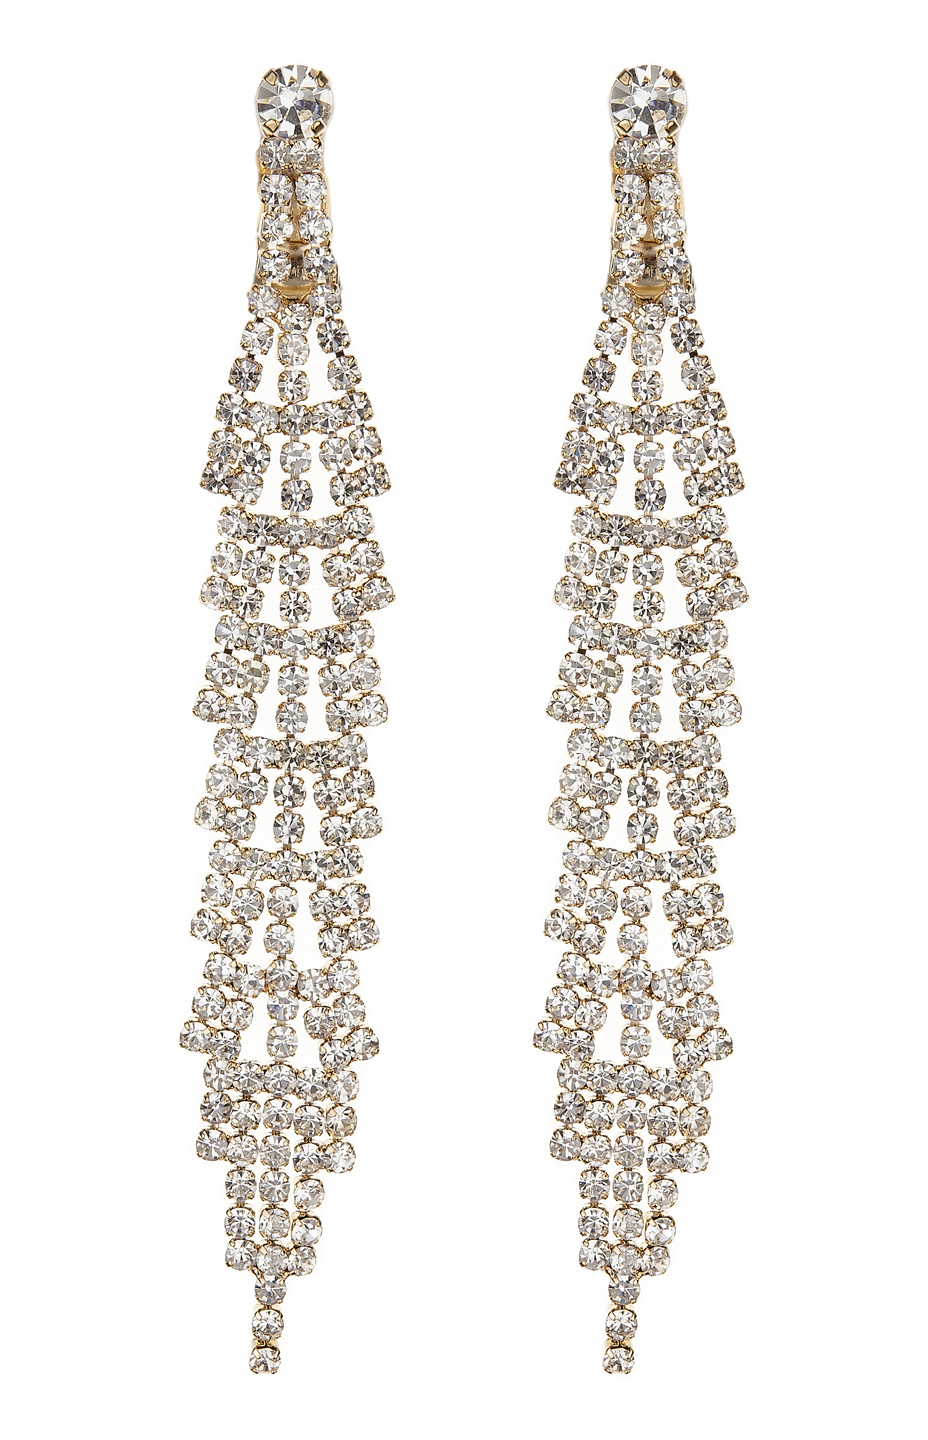 Clip On Earrings - Cain G - gold drop earring with clear crystals